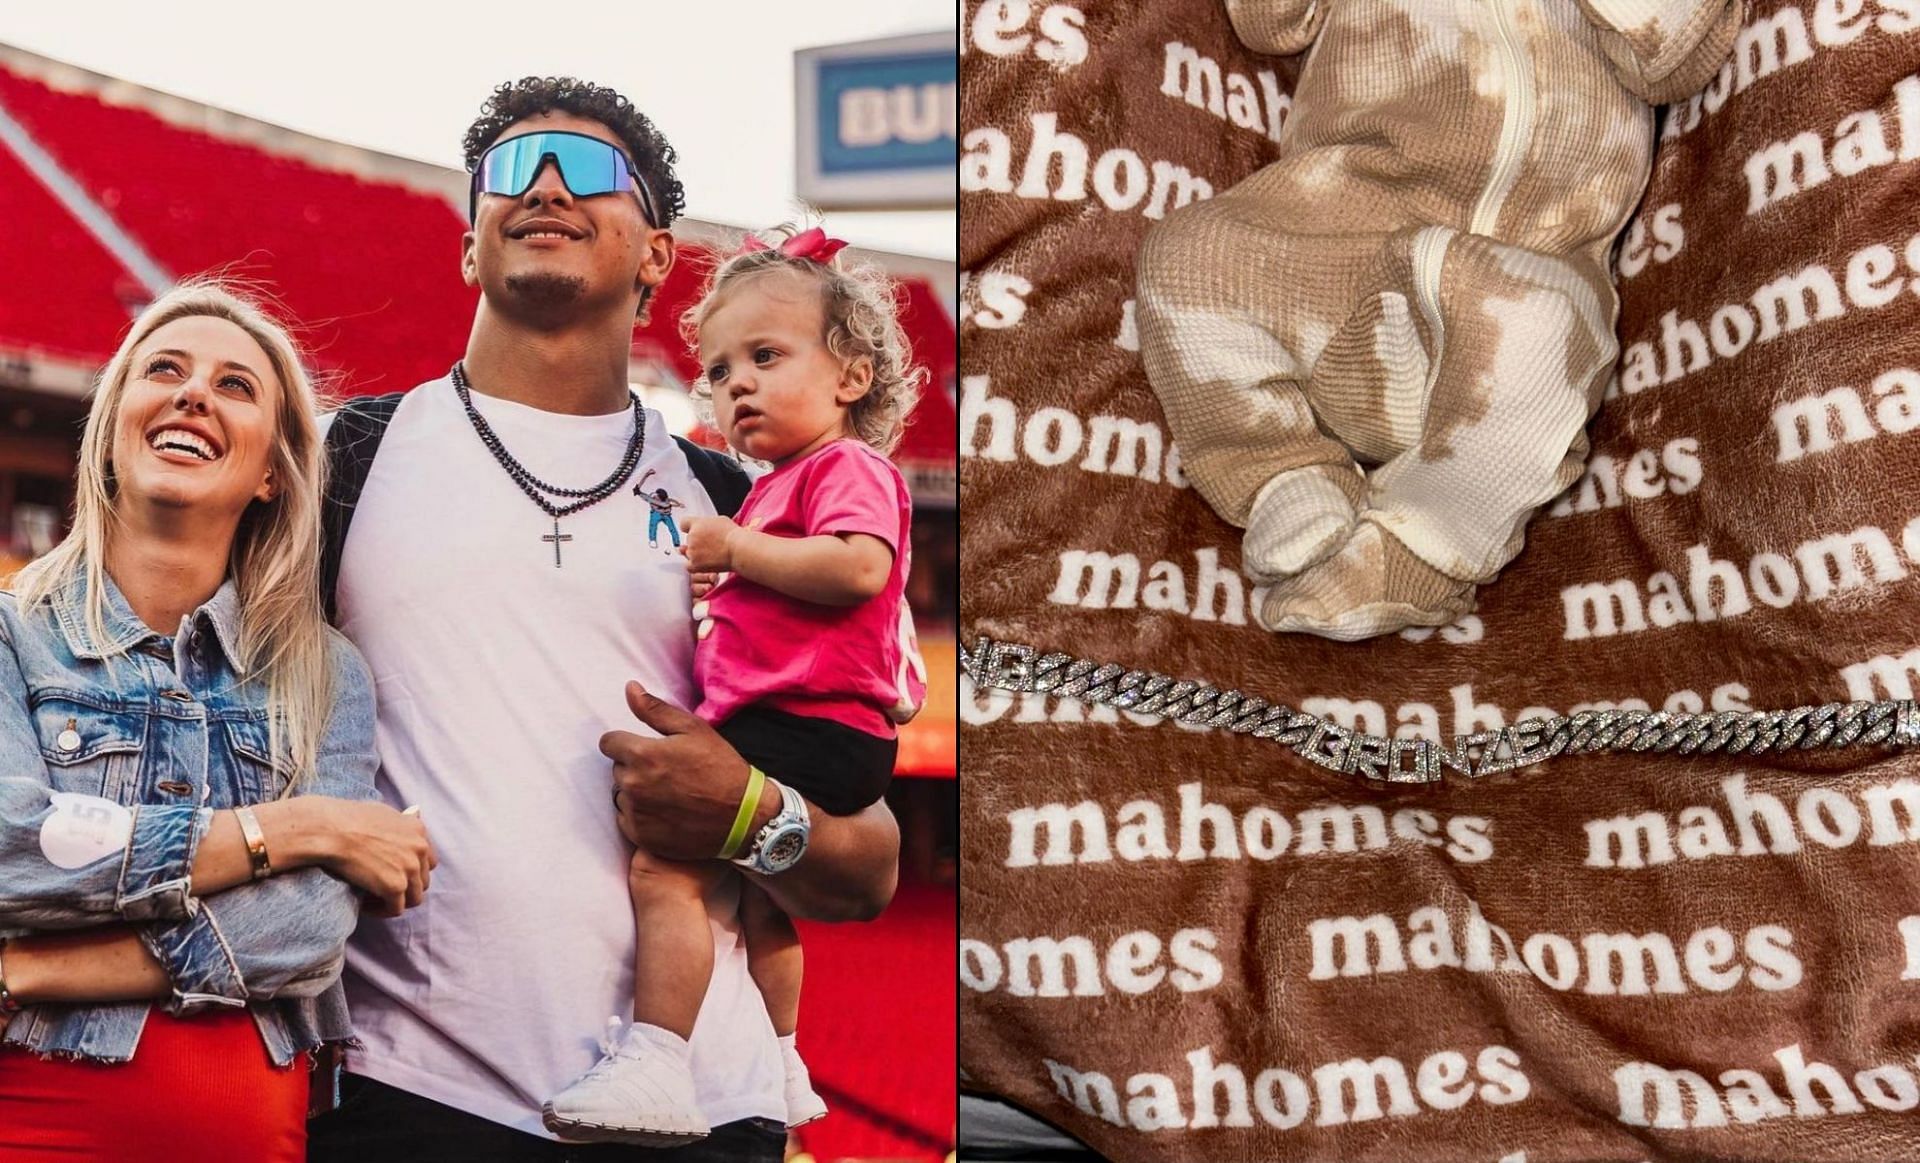 Is Patrick Mahomes' son Bronze going to follow in his father's footsteps?